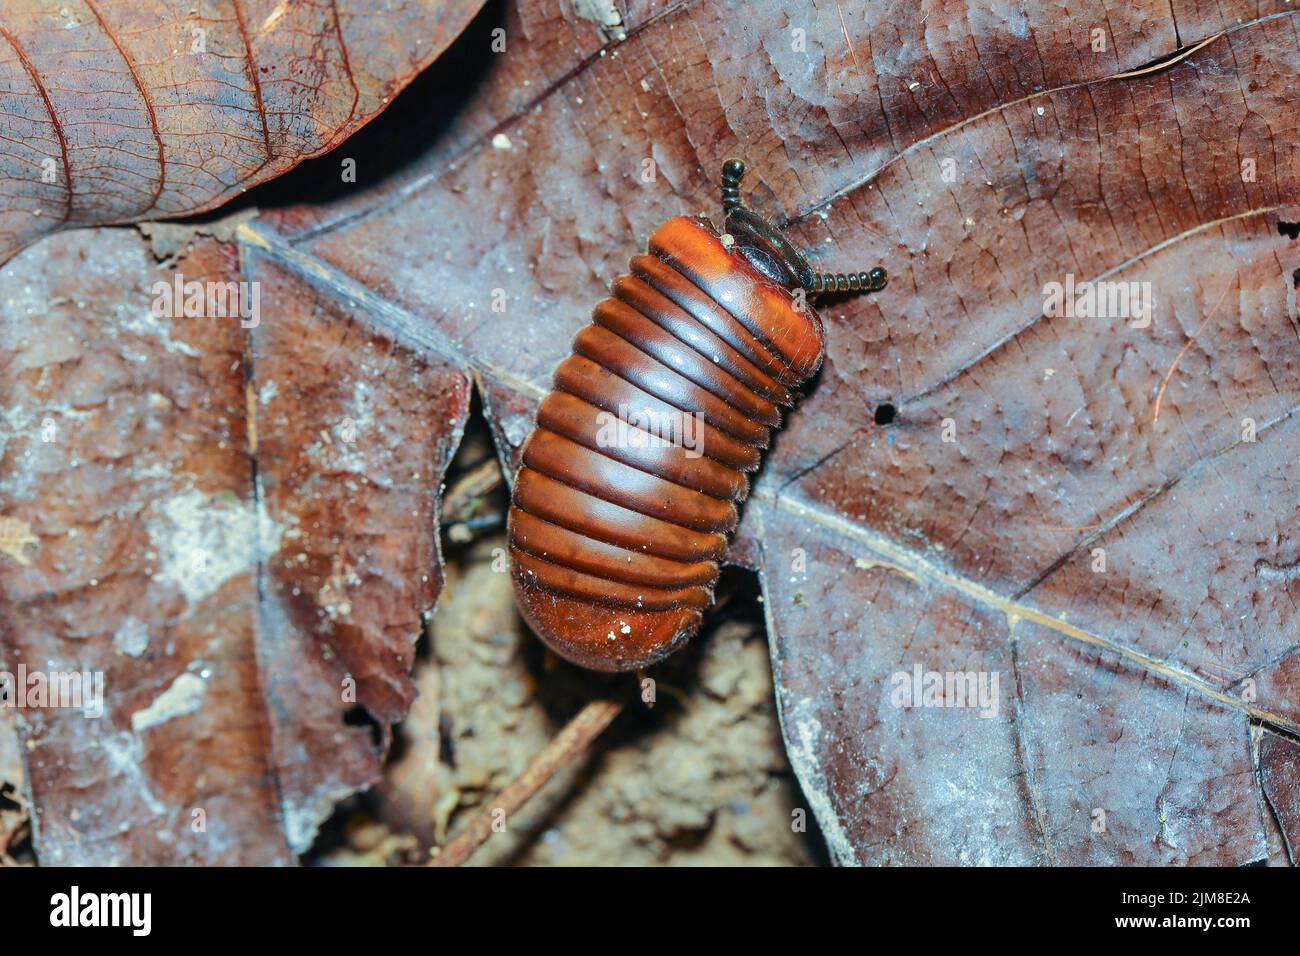 Pill millipede, Oniscomorpha, found on the jungle floor in a tropical jungle Stock Photo